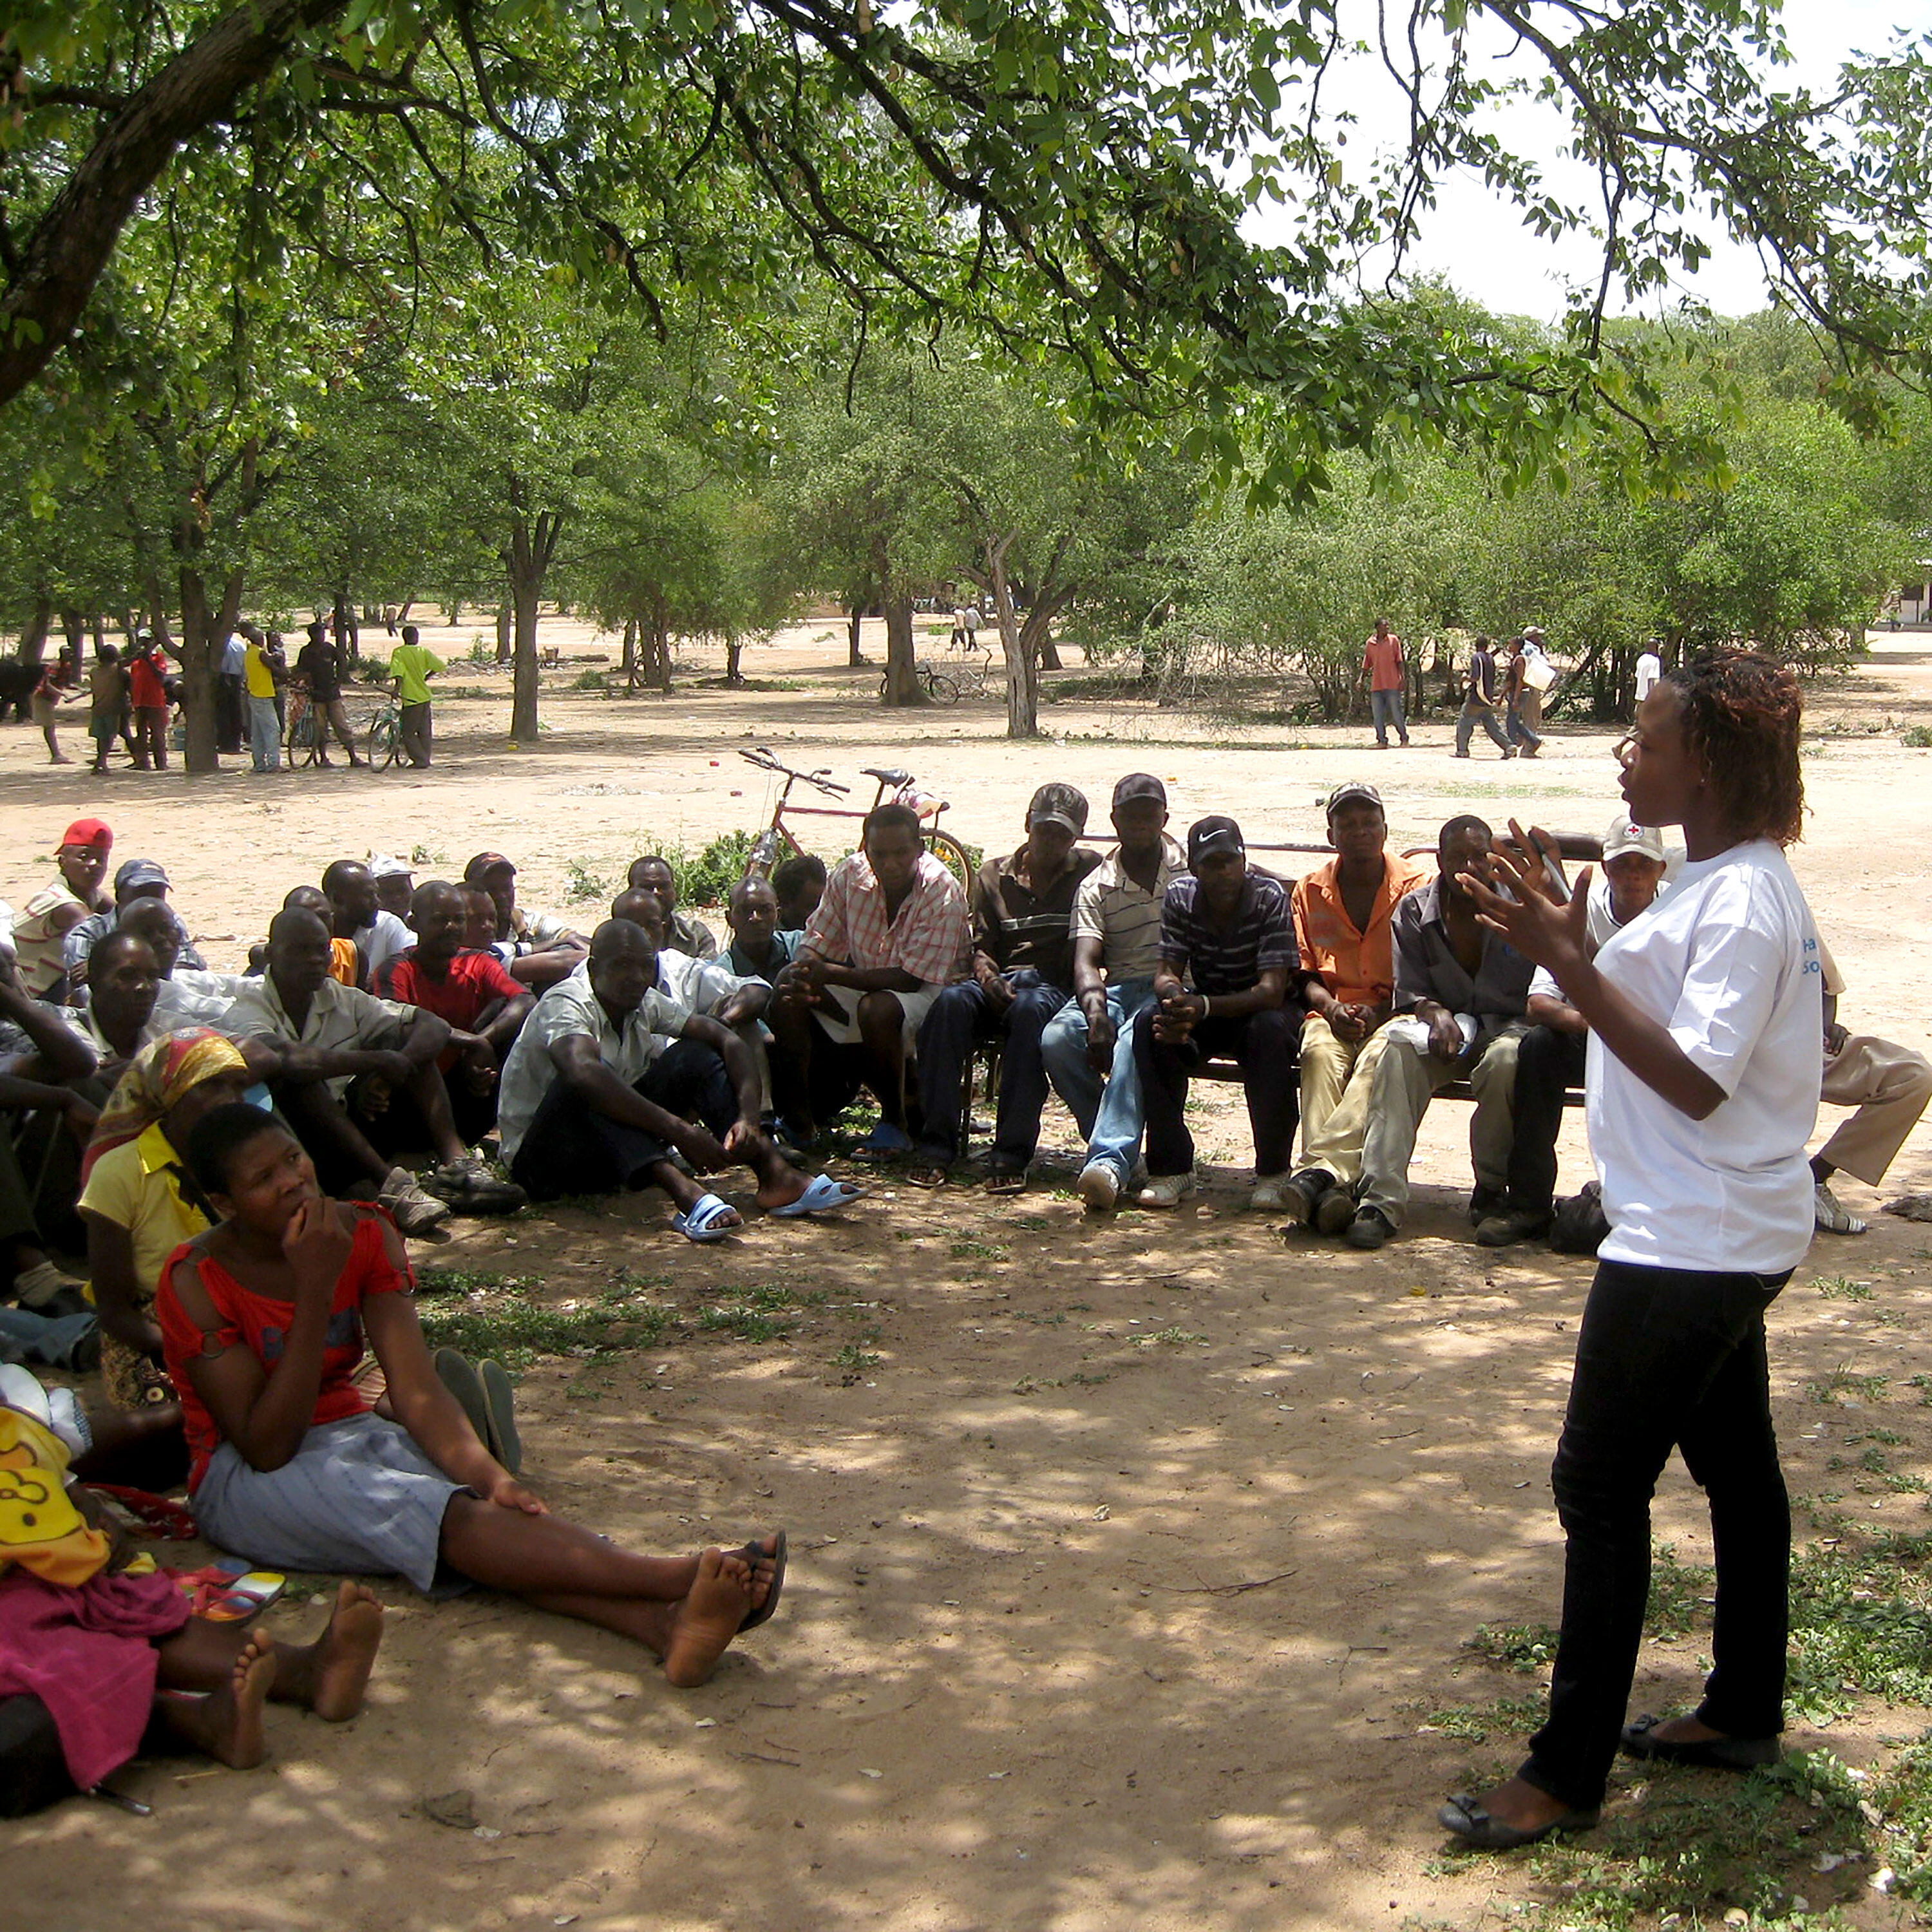 A woman who is an IRC staff member stands speaking animatedly to a group of people seated on the ground in the shade of a tree in Zimbabwe